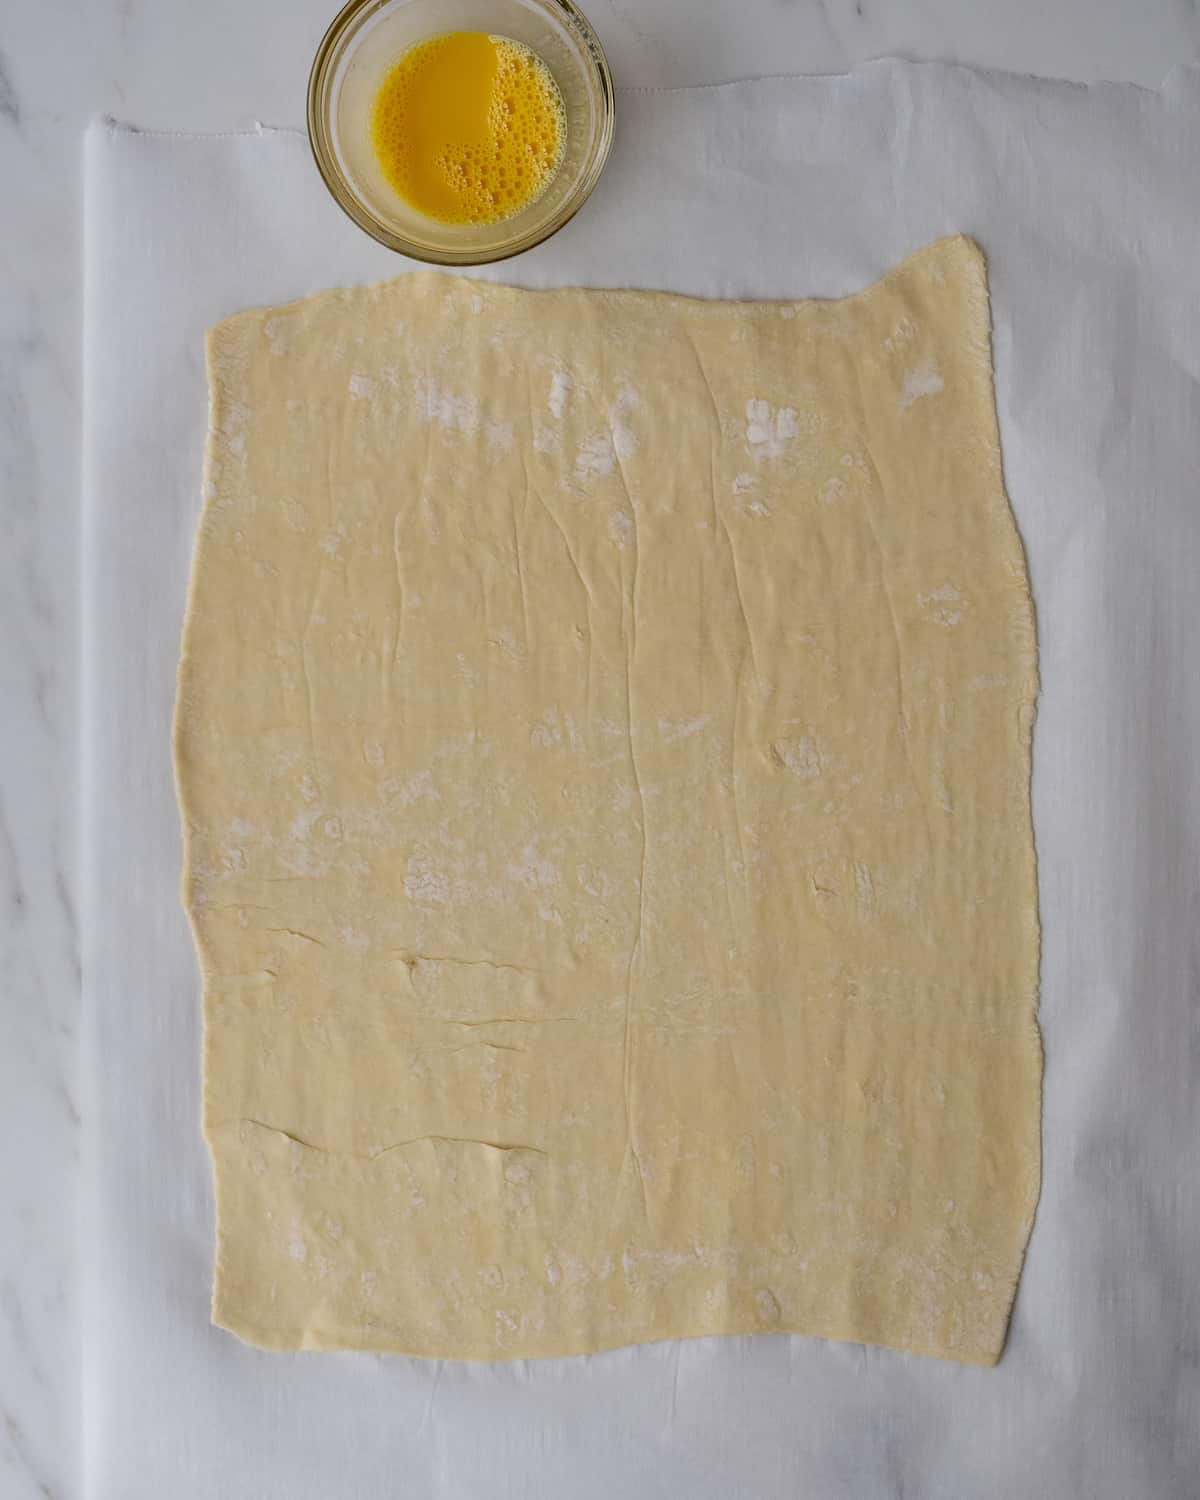 Puff pastry in an 11 x 15-inch rectangle on top of parchment paper with a small clear bowl of beaten egg yolk.